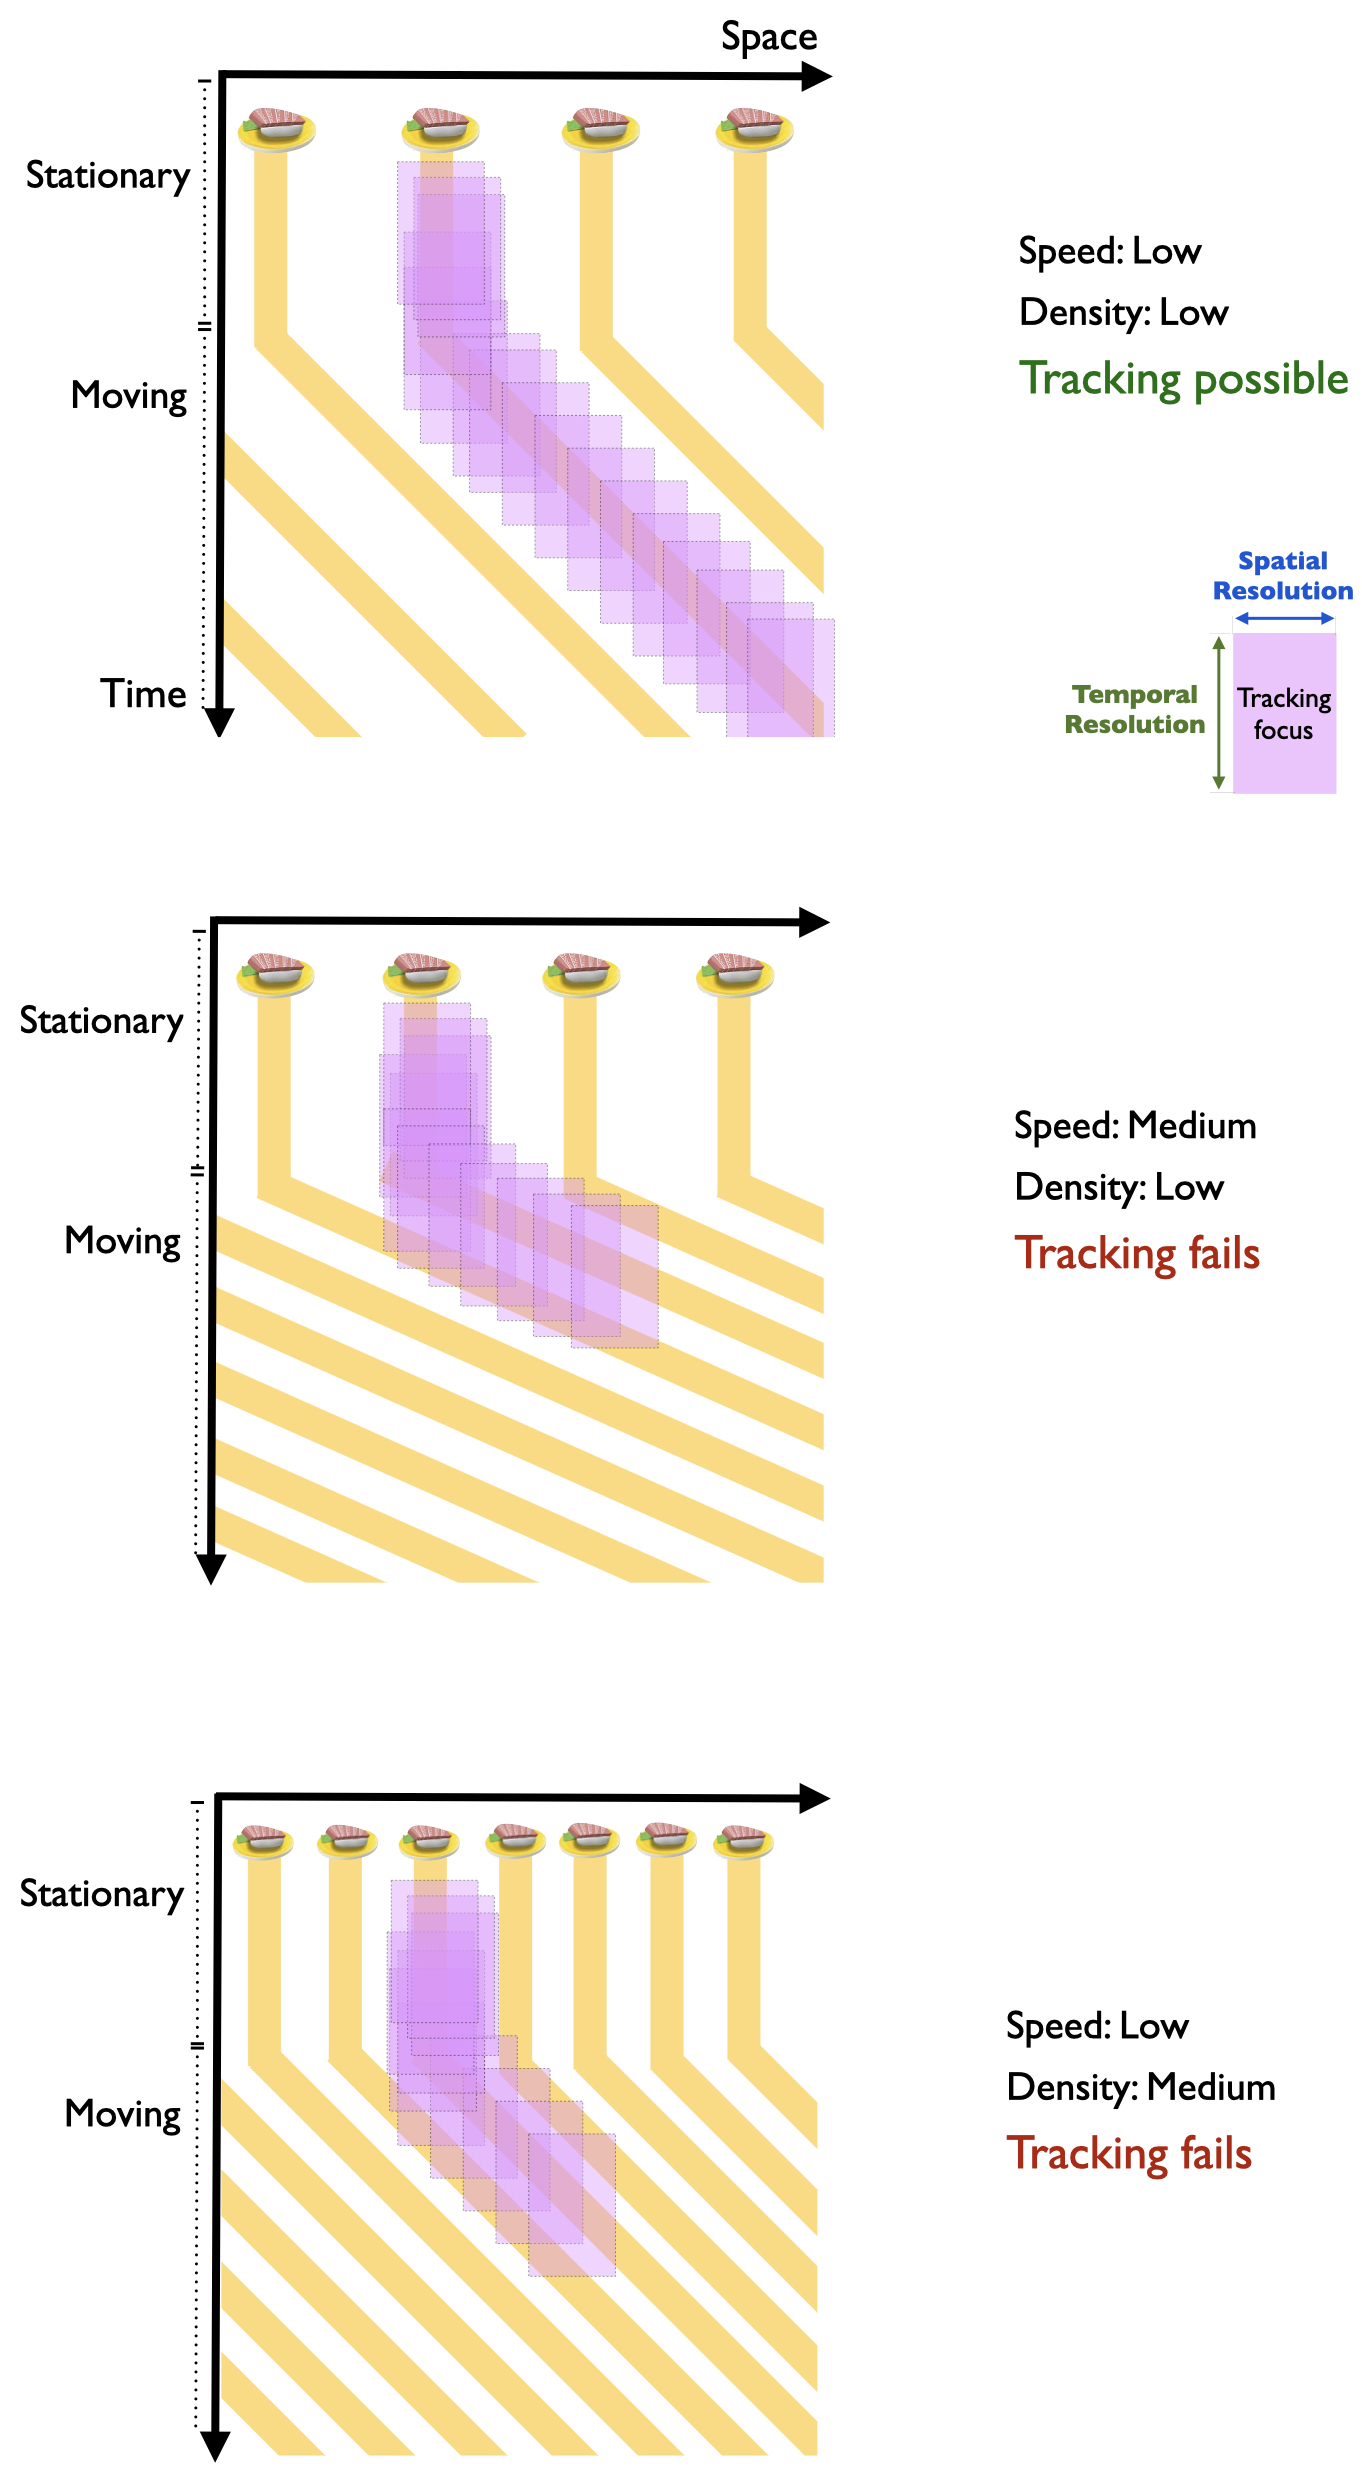 The purple rectangle represents the spatial resolution (width) and temporal resolution (height) of tracking. Top panel: In a space-time diagram, one piece of sushi of a sushi rain is designated as the target. Density and speed are low. Tracking processes are able to select an individual sushi. Middle panel: At medium speed, despite low density, tracking fails because temporal resolution is exceeded. Bottom panel: At low speed, but medium density, tracking fails because temporal resolution is exceeded.